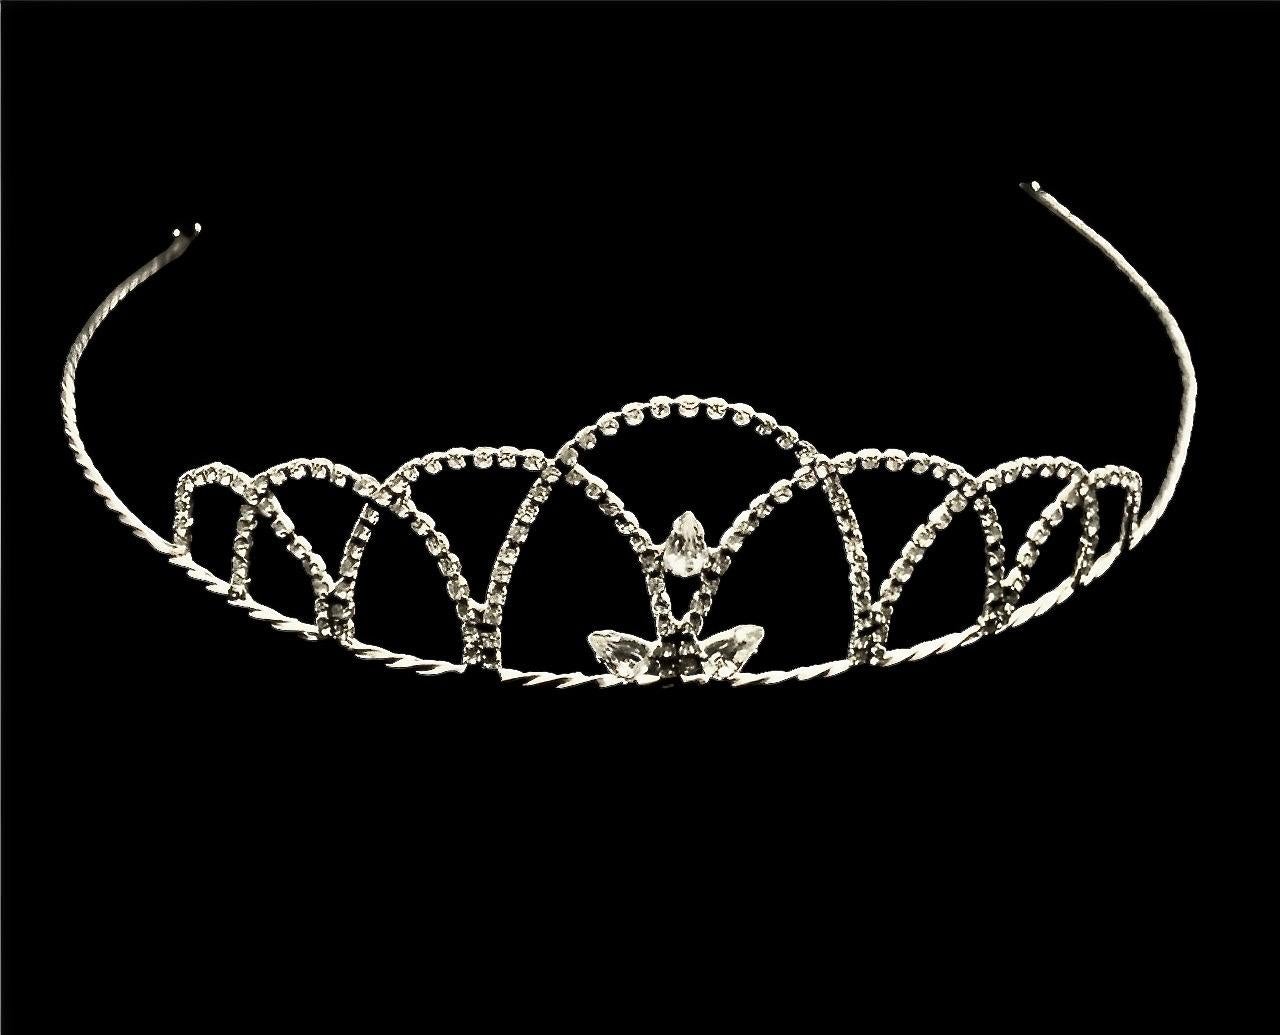 Silver Plated Tiara with a Rope Twist Band and Faceted Rhinestones circa 1960s For Sale 2